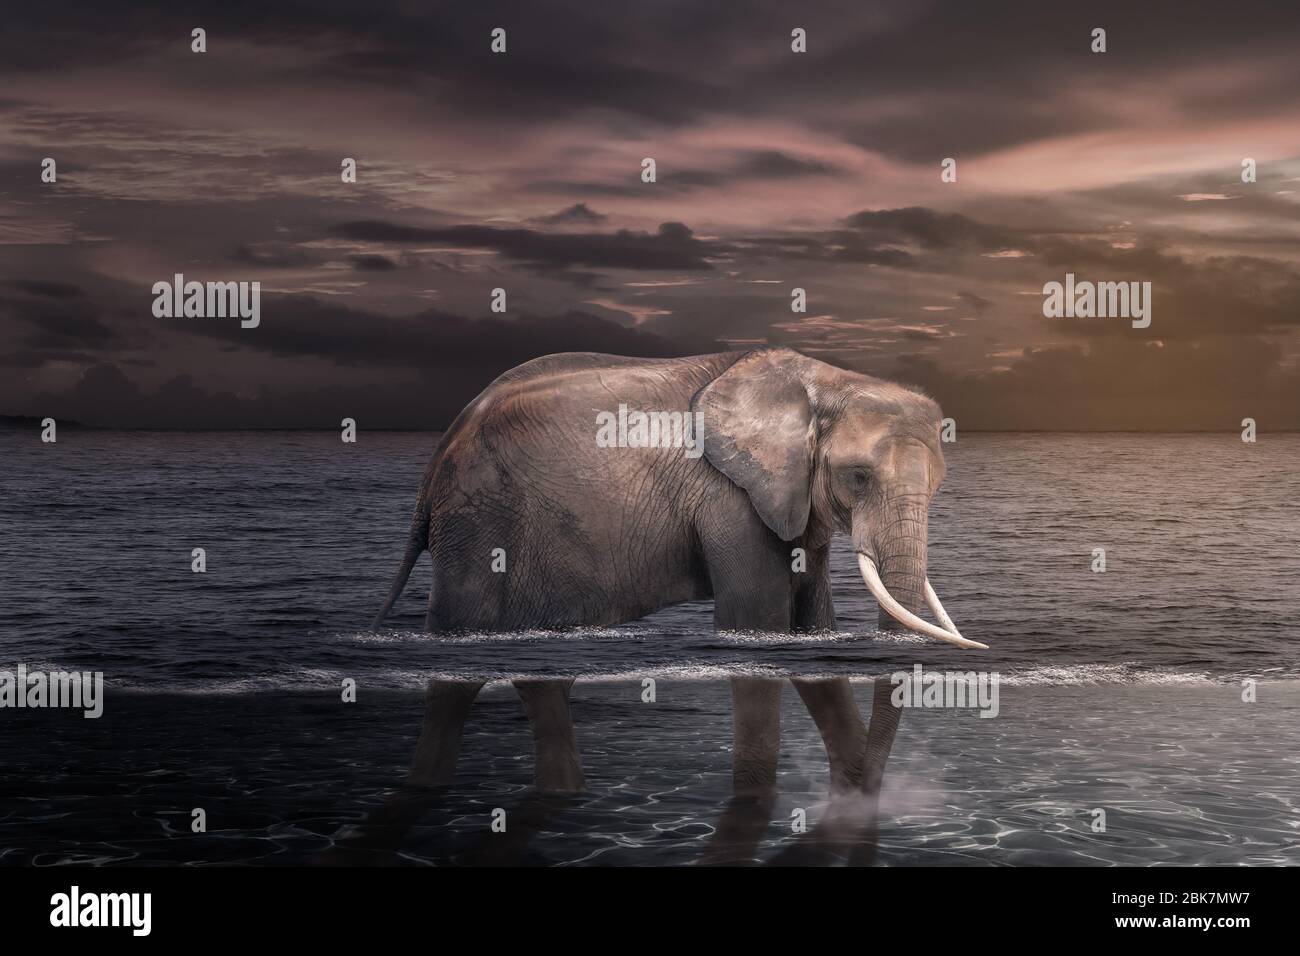 African elephant in the water. Stock Photo